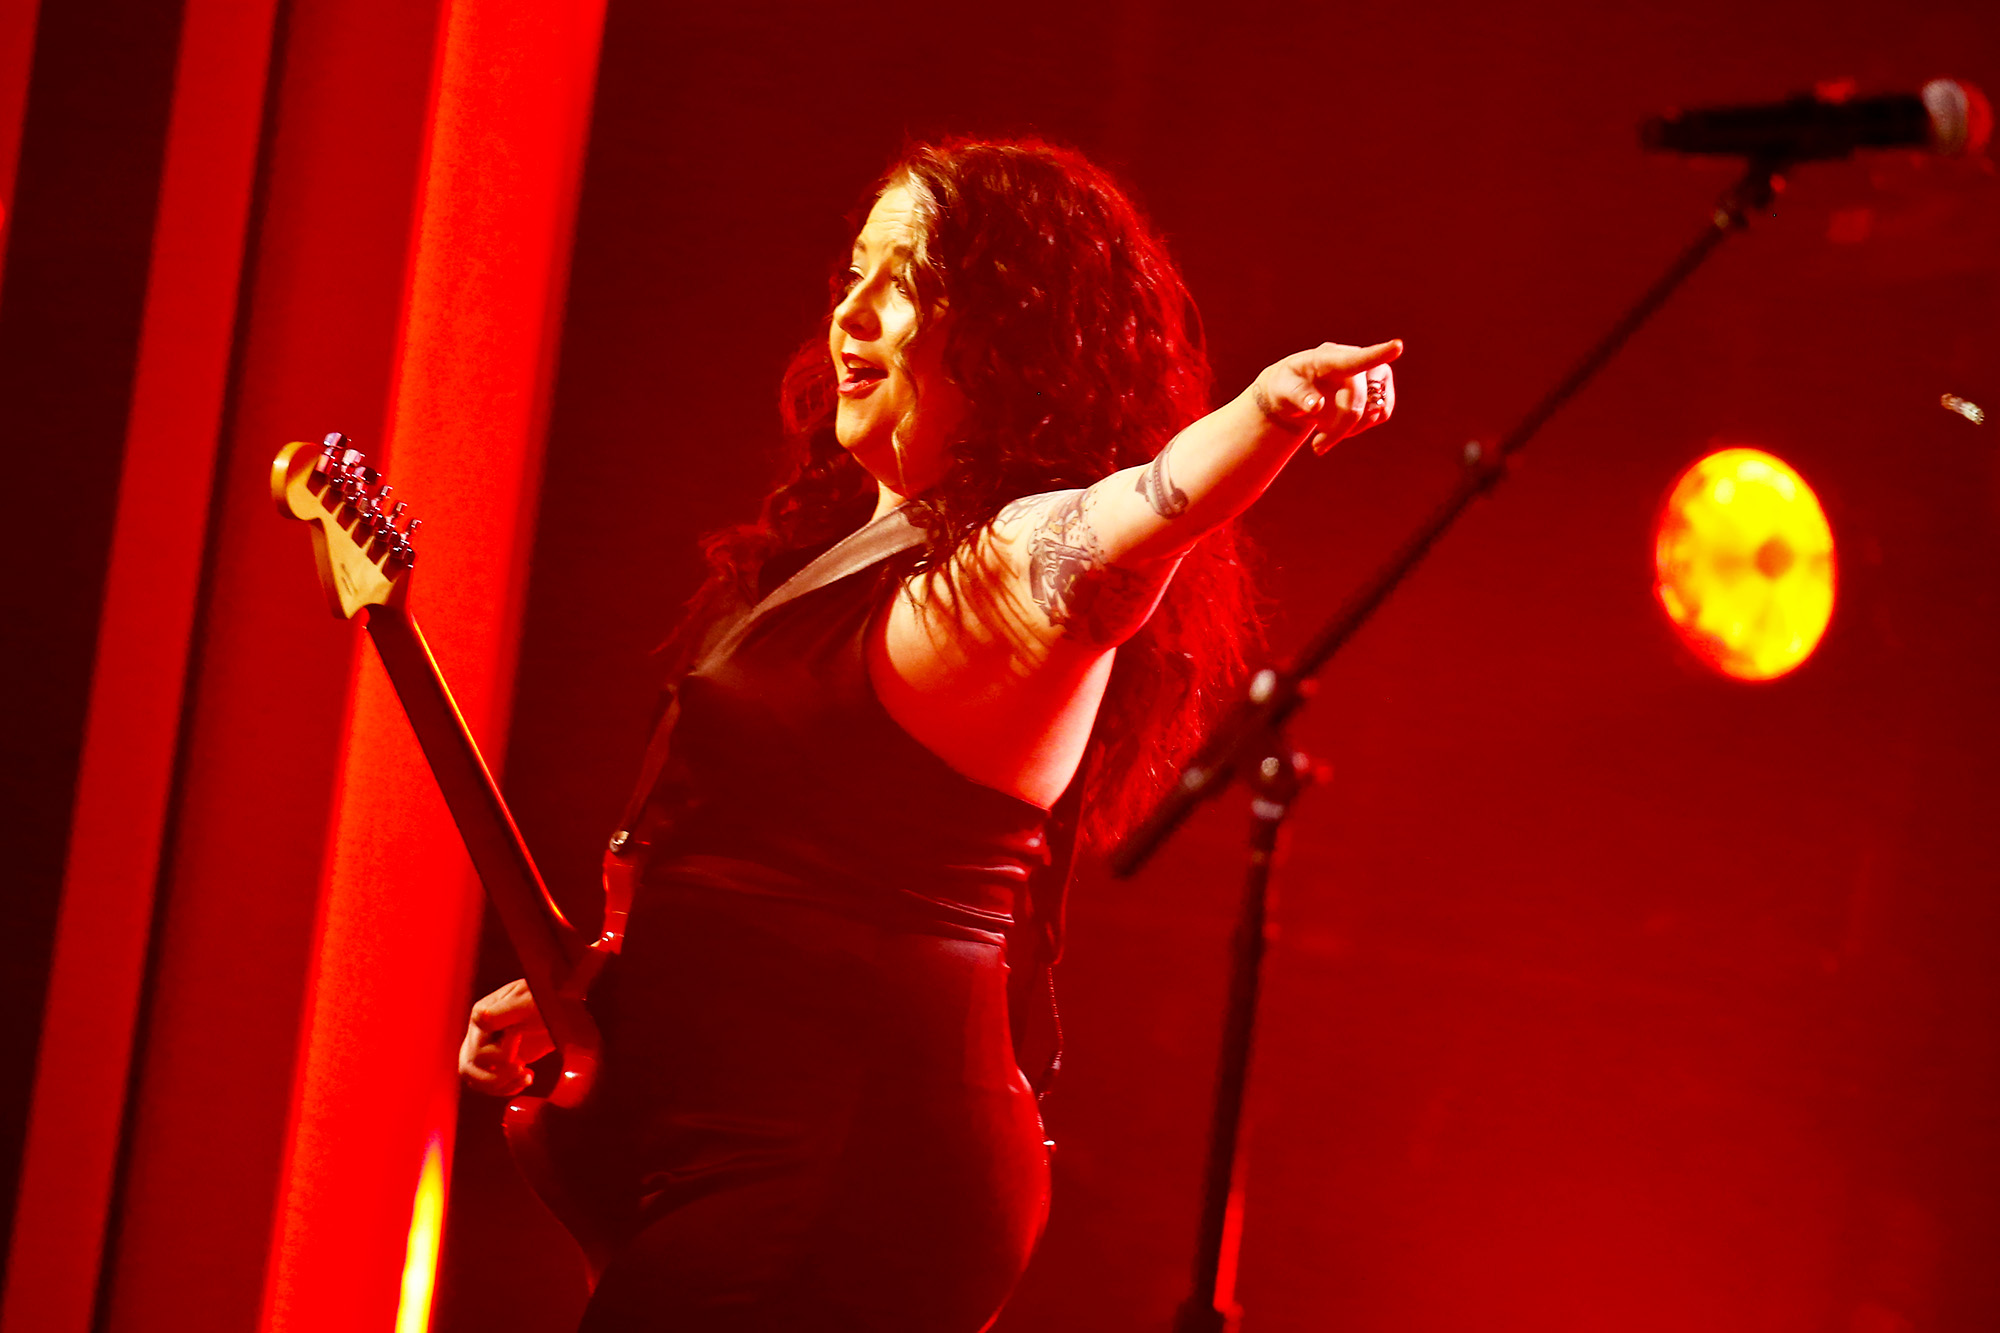 PHOTO: Ashley McBryde performs onstage during the The 54th Annual CMA Awards in Nashville, Tenn., Nov. 11, 2020.